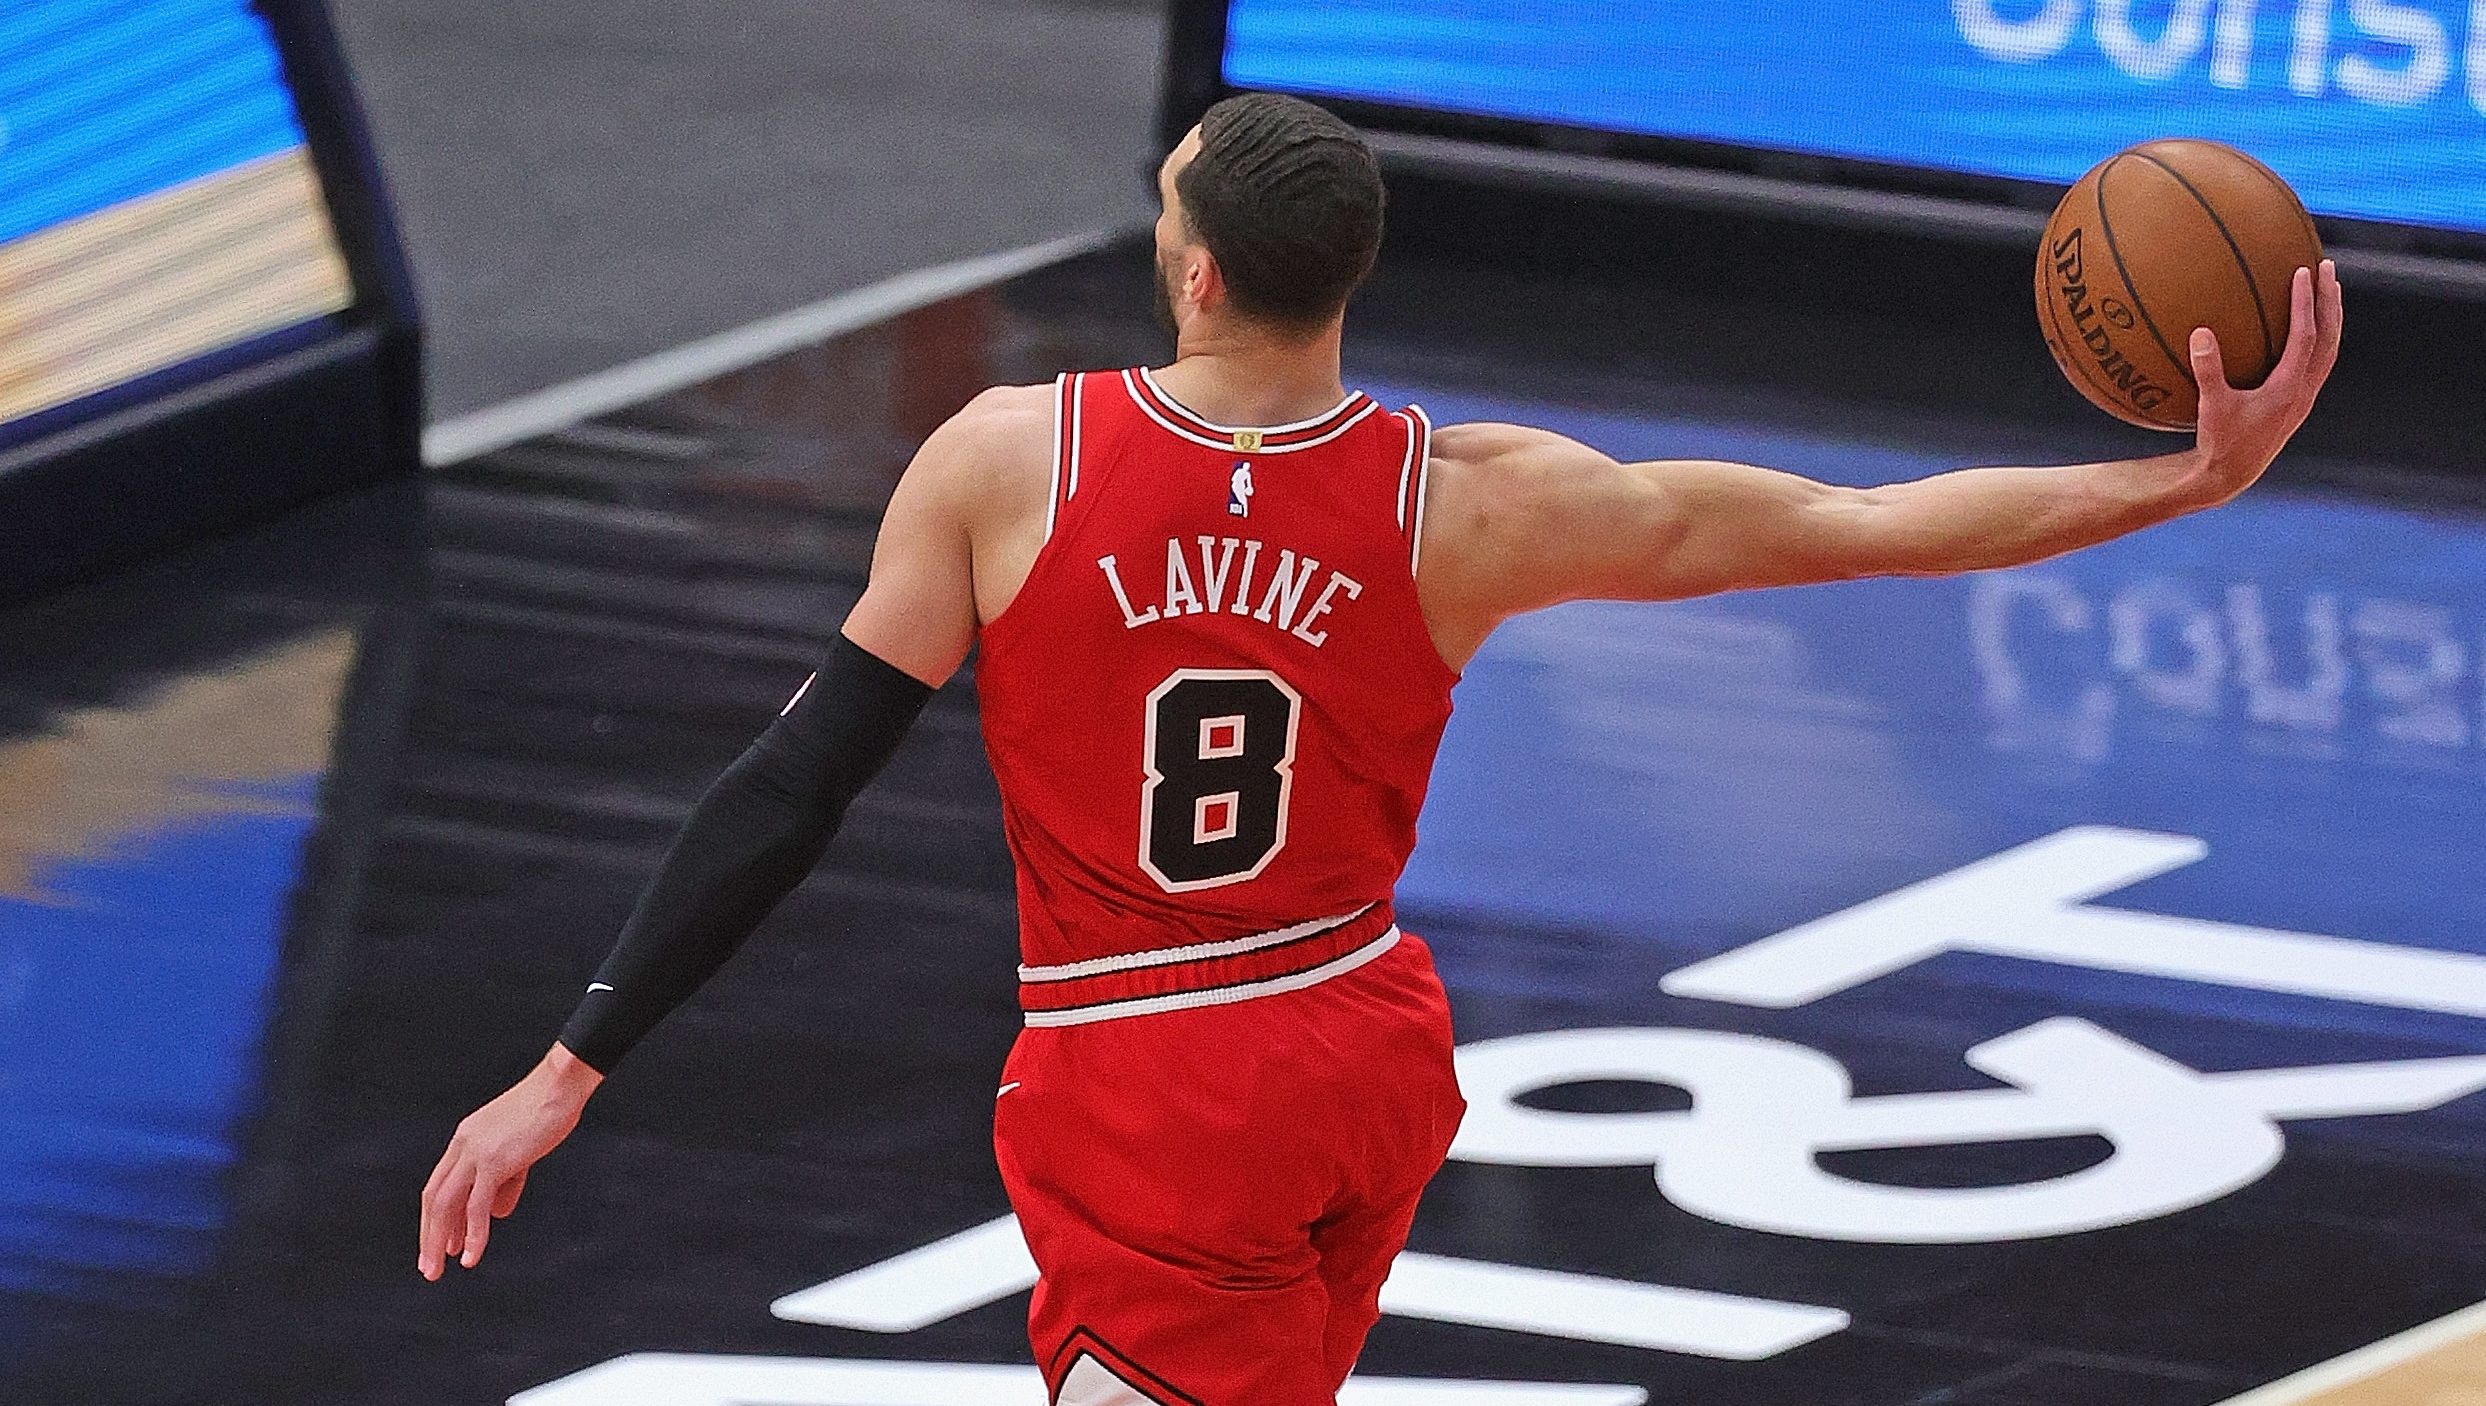 Not-so-free throws for Zach LaVine: Bulls guard looks for respect